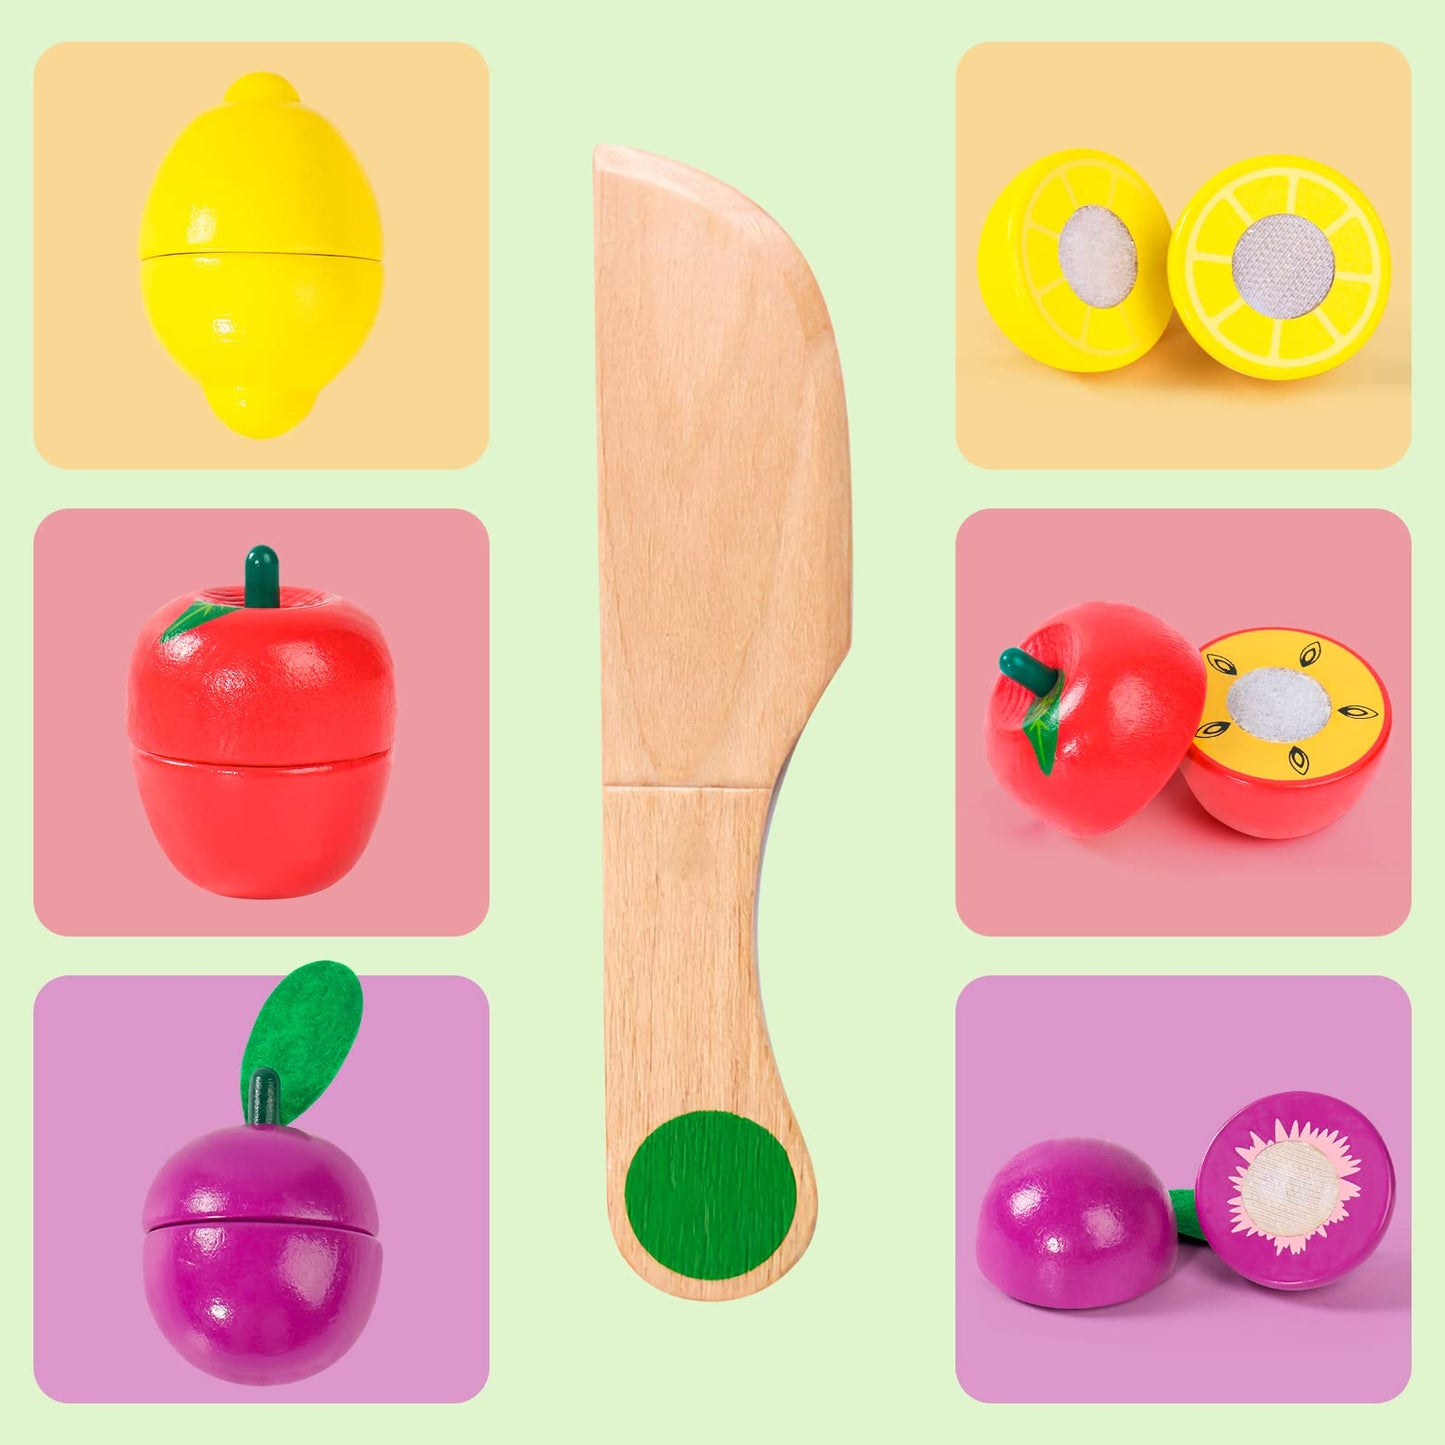 Wooden Play Food Sets for Toddlers Montessori Toys for 2 Year Old Kitchen Accessories Cutting Kids Pretend Play Fake Fruit Vegetable Learning Toddler